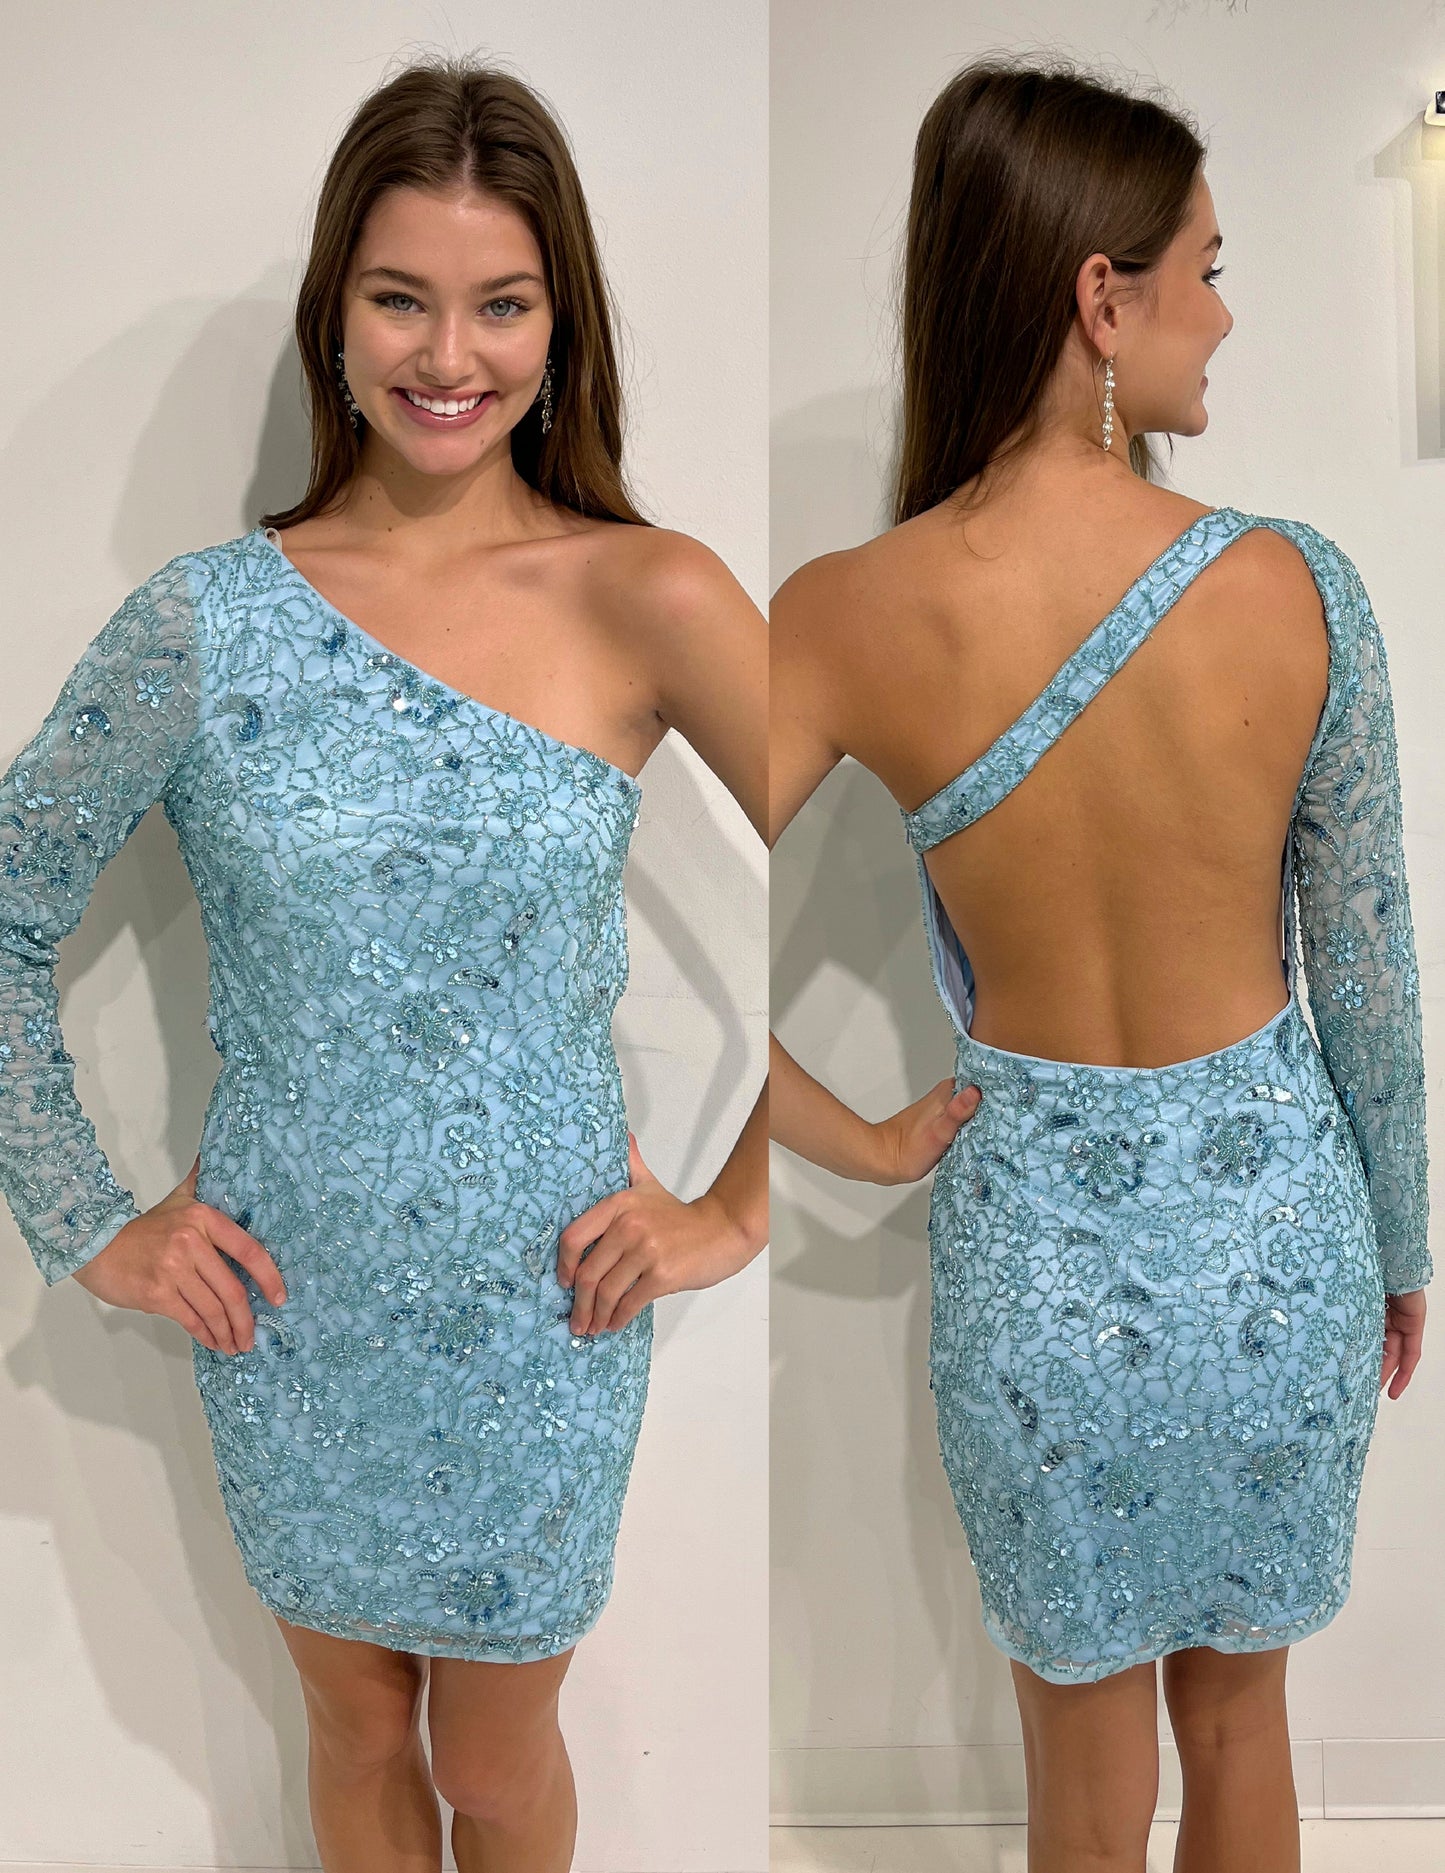 Primavera-Couture-3865-Powder-Blue-Cocktail-Dress-One-Shoulder-One-Long-sleeve-backless